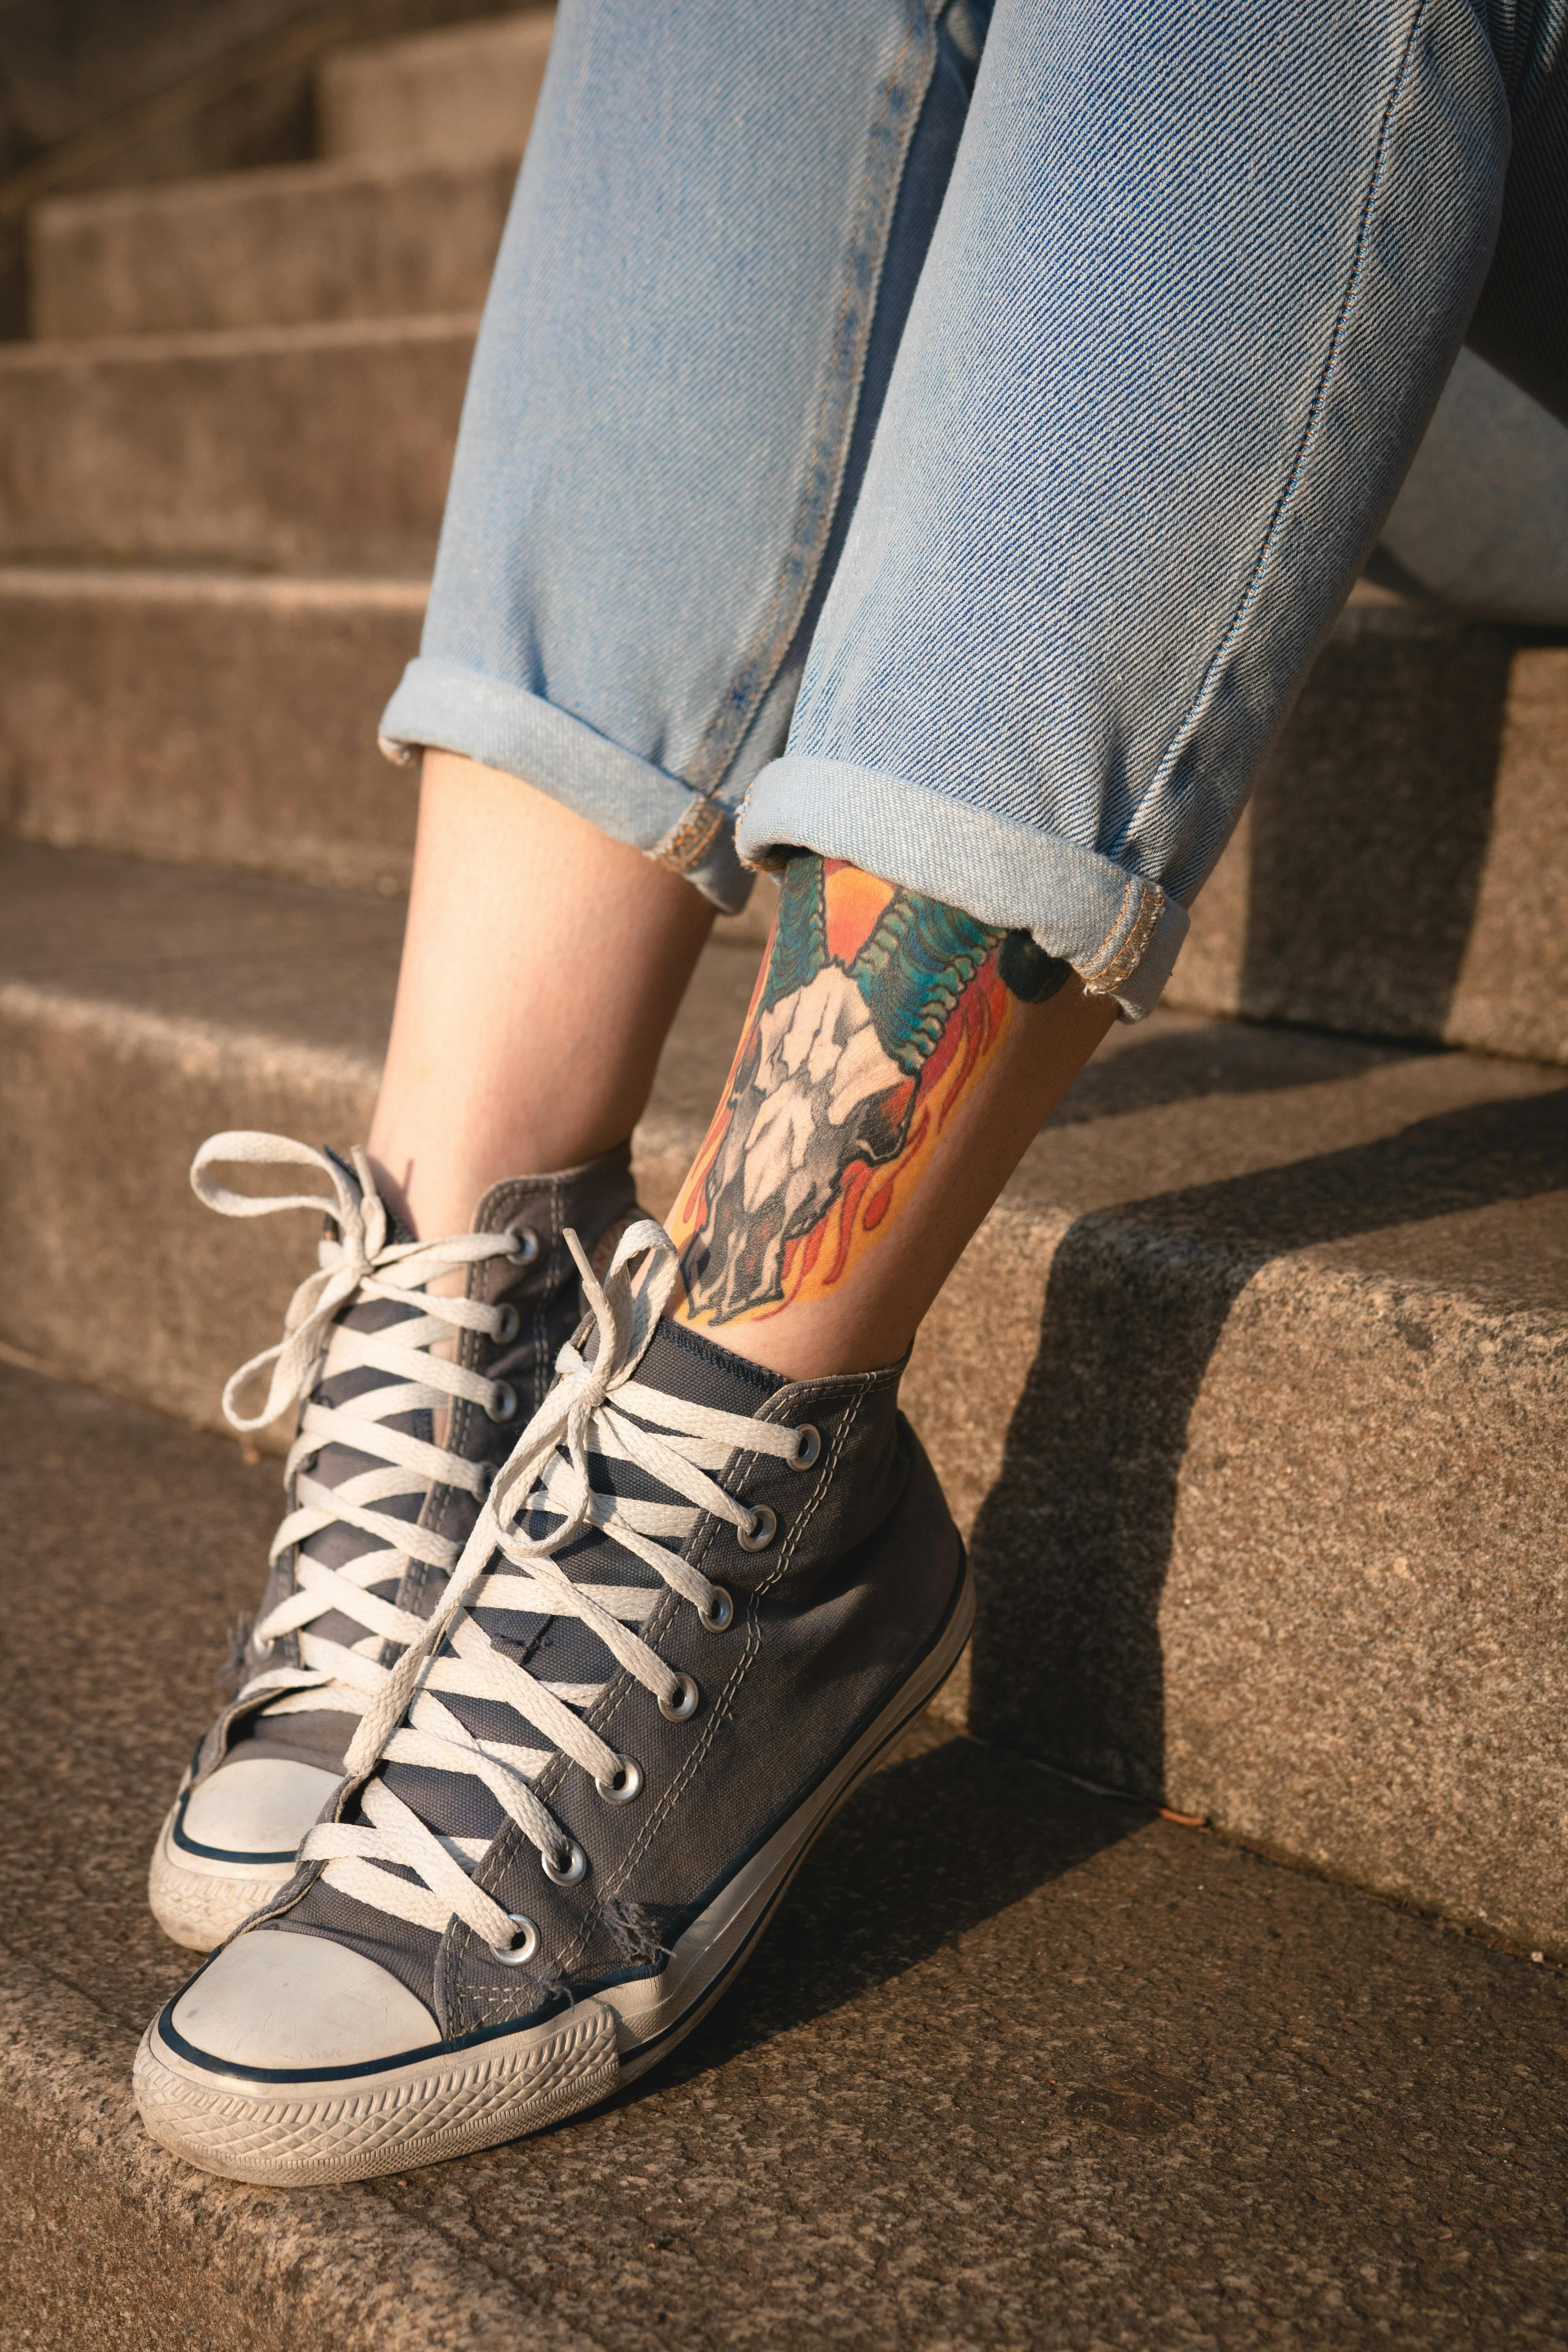 rash every time doorway Pair of Gray Converse All-star Chuck Taylor Shoes · Free Stock Photo